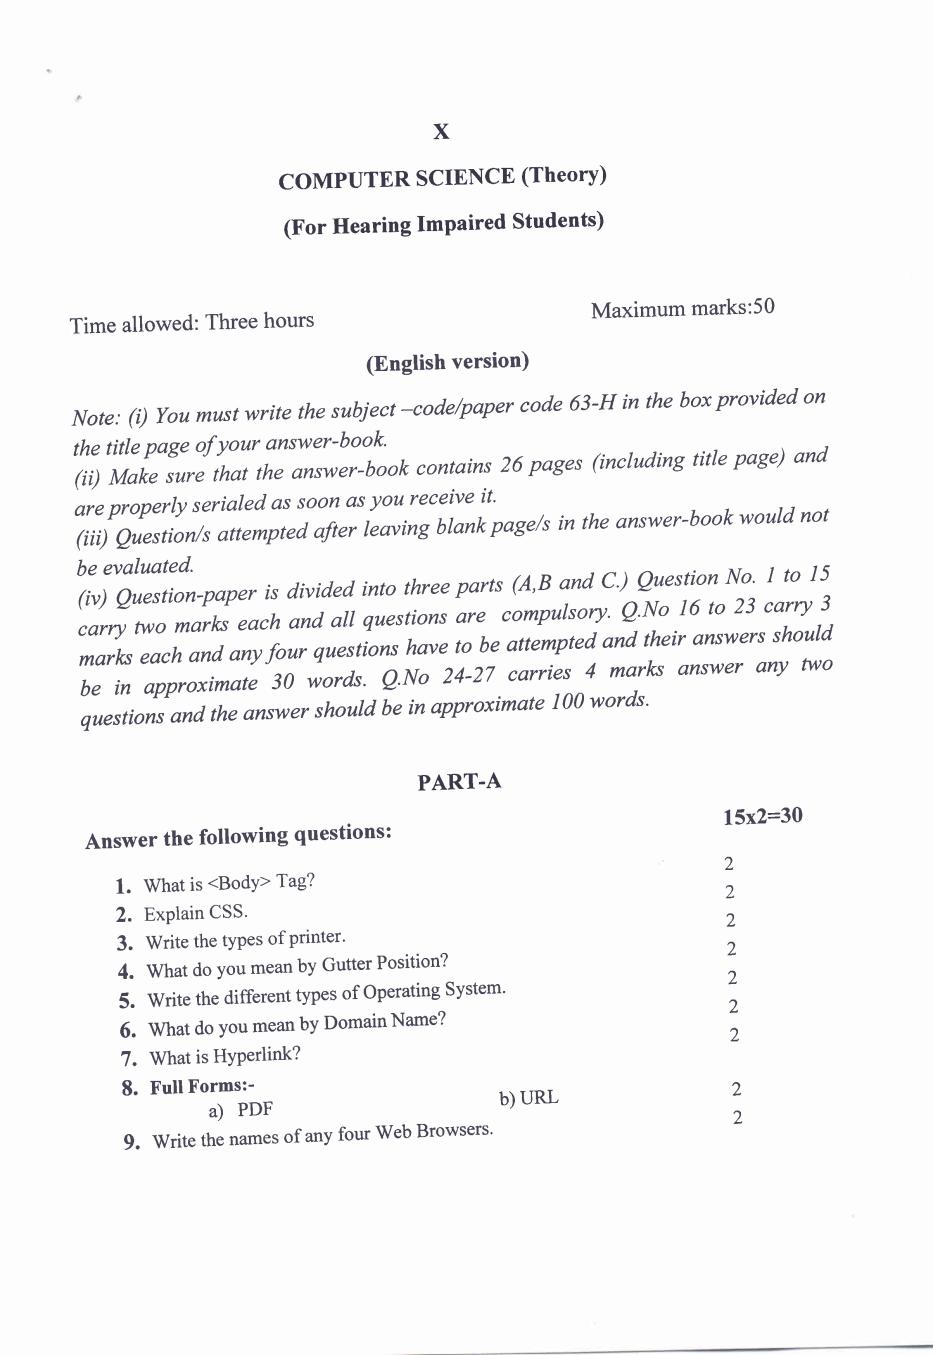 PSEB 10th Model Test Paper of Computer Science